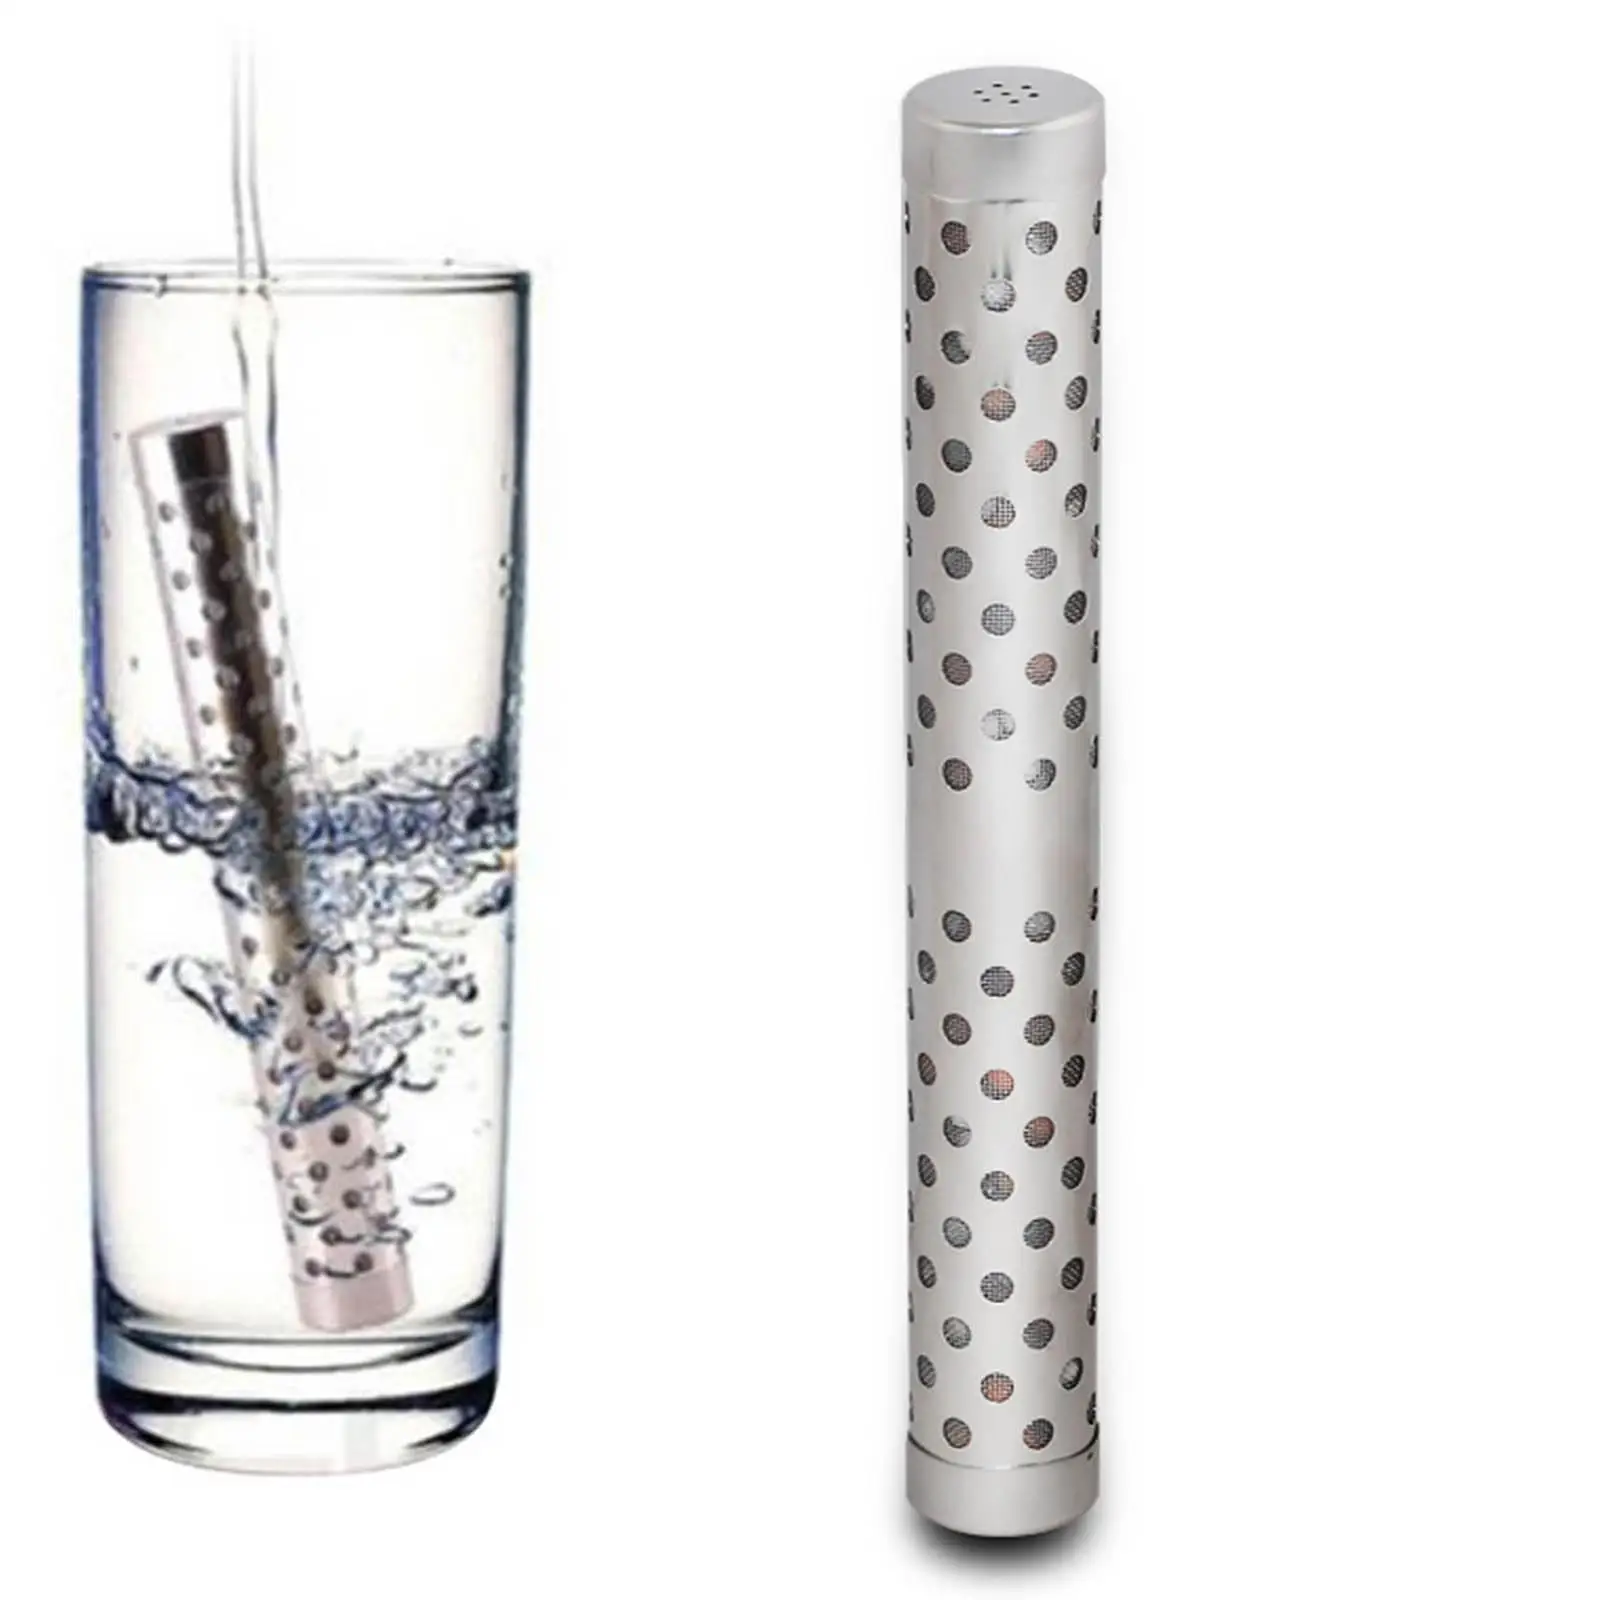 Alkaline Water Ionizer Stainless Water Purifier Small Naturally Increases PH Levels Portable Health Supplies Travel